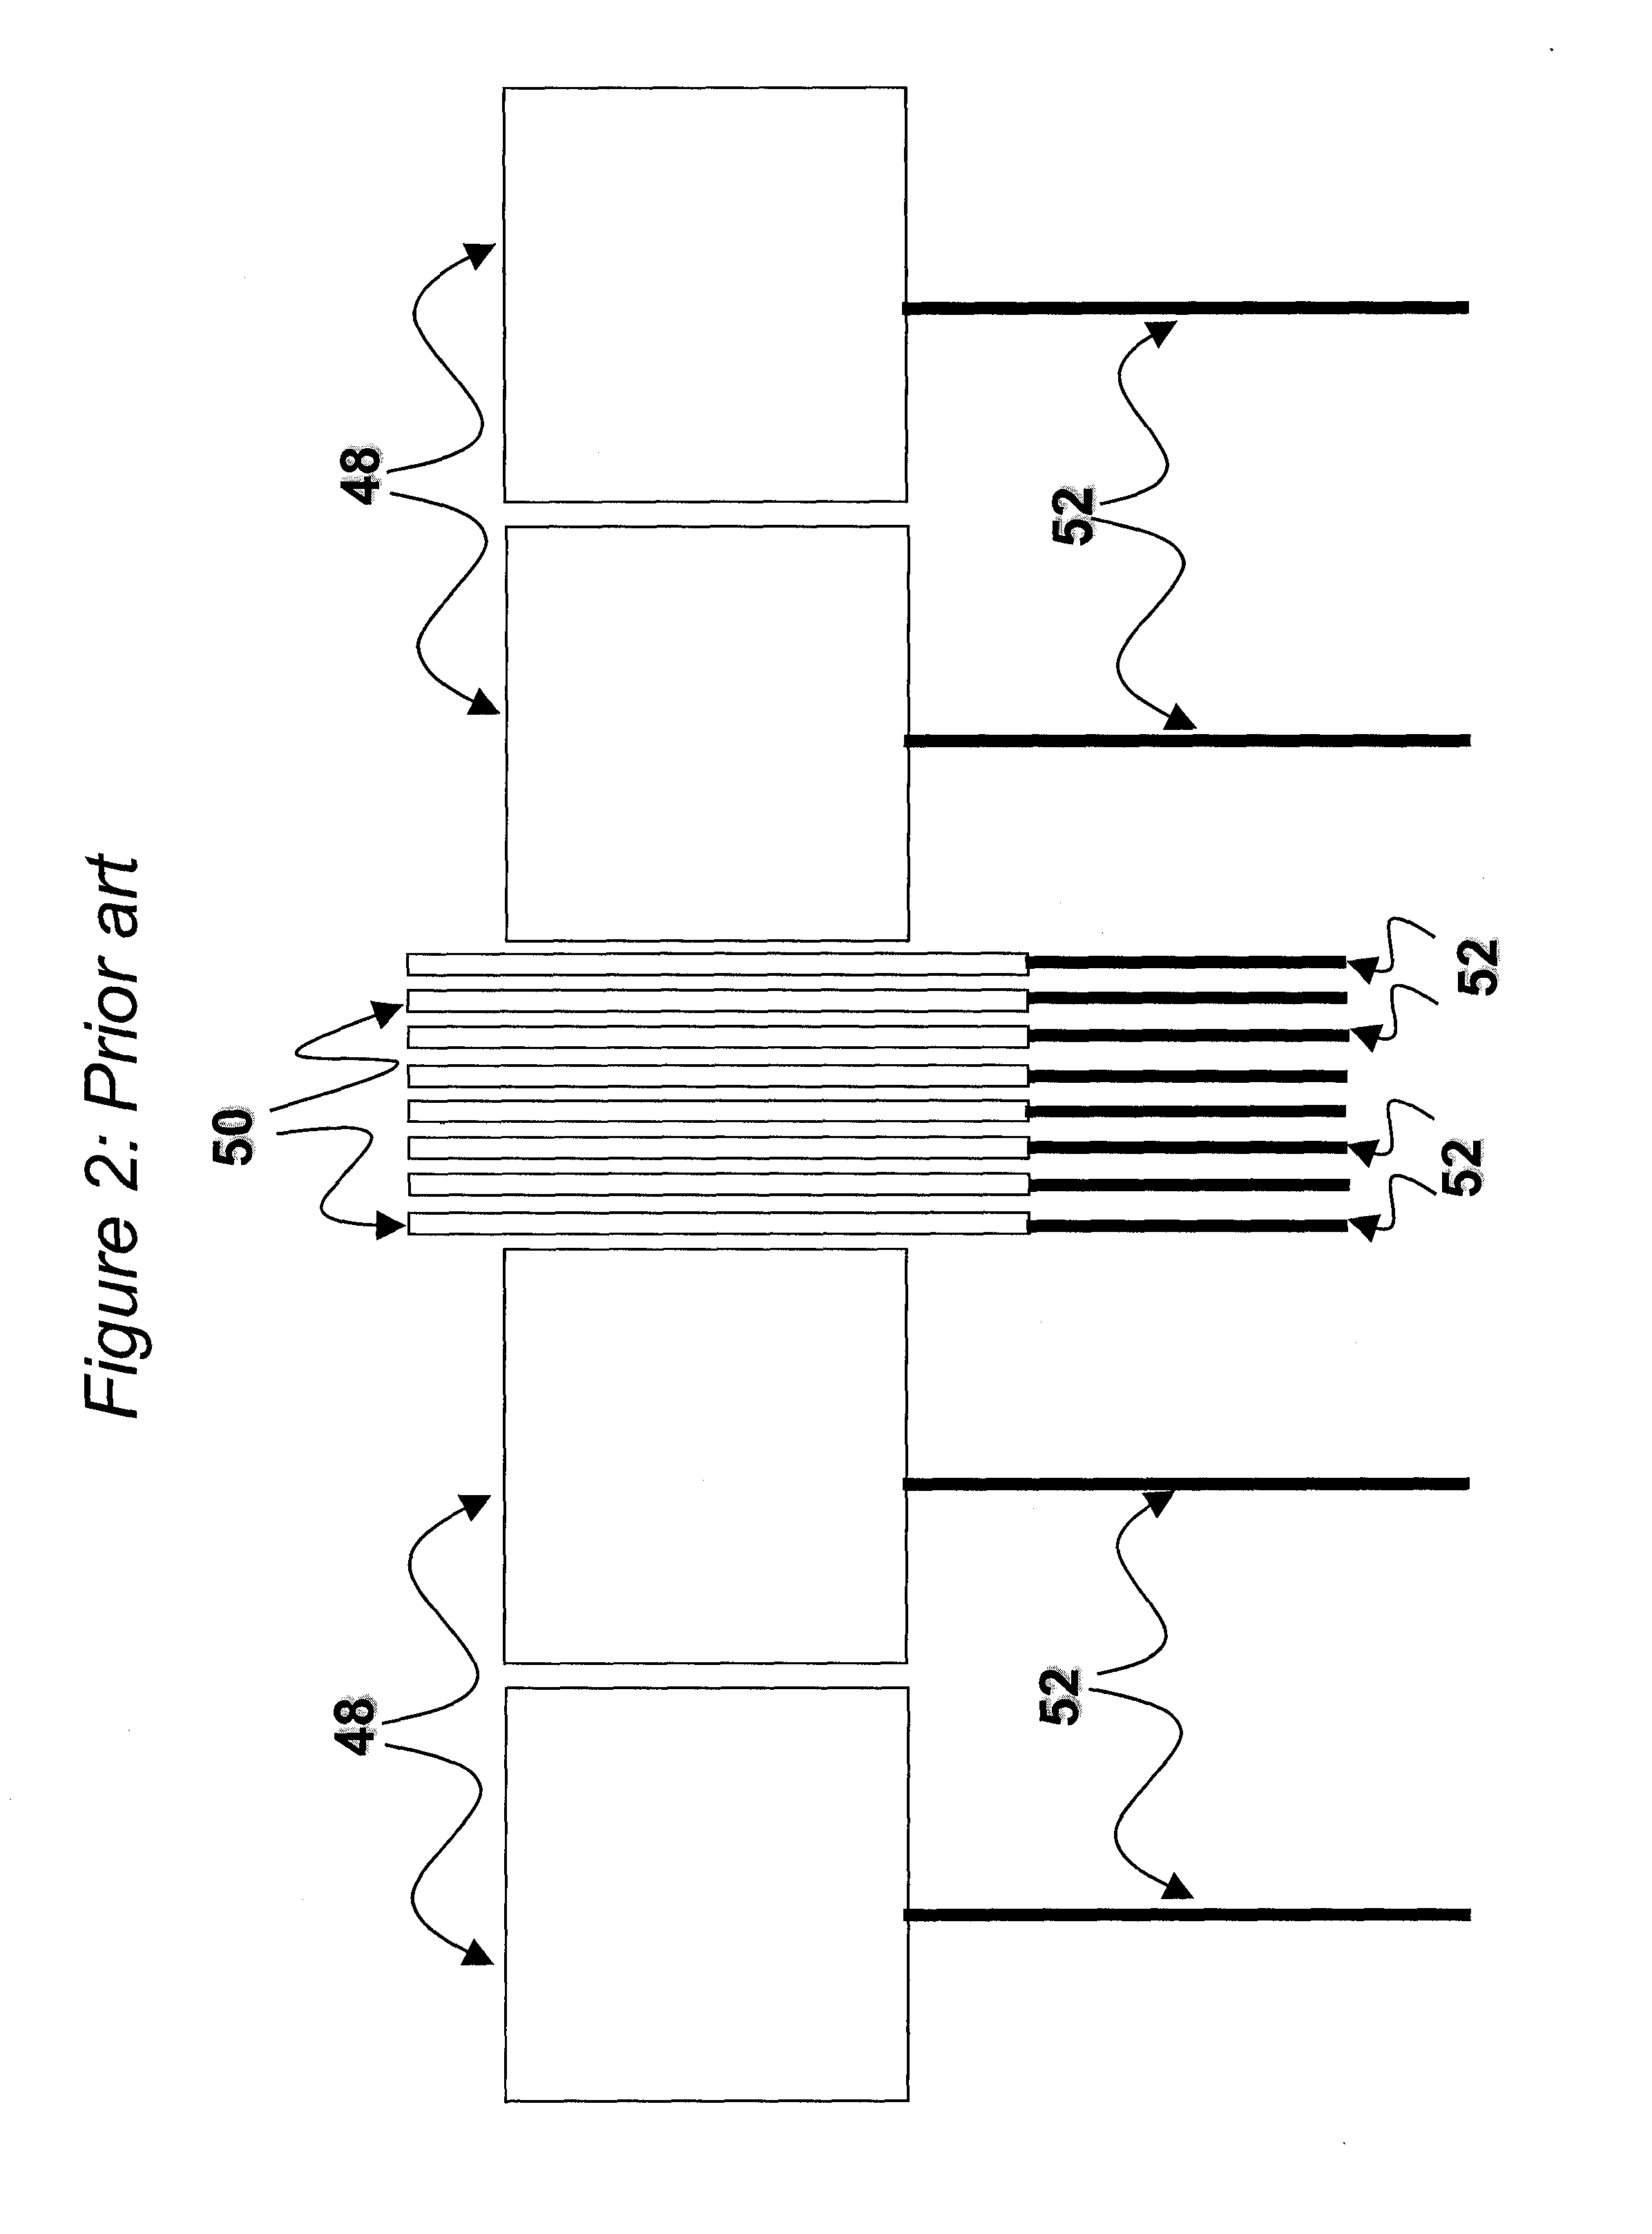 Active matrix device for fluid control by electro-wetting and dielectrophoresis and method of driving